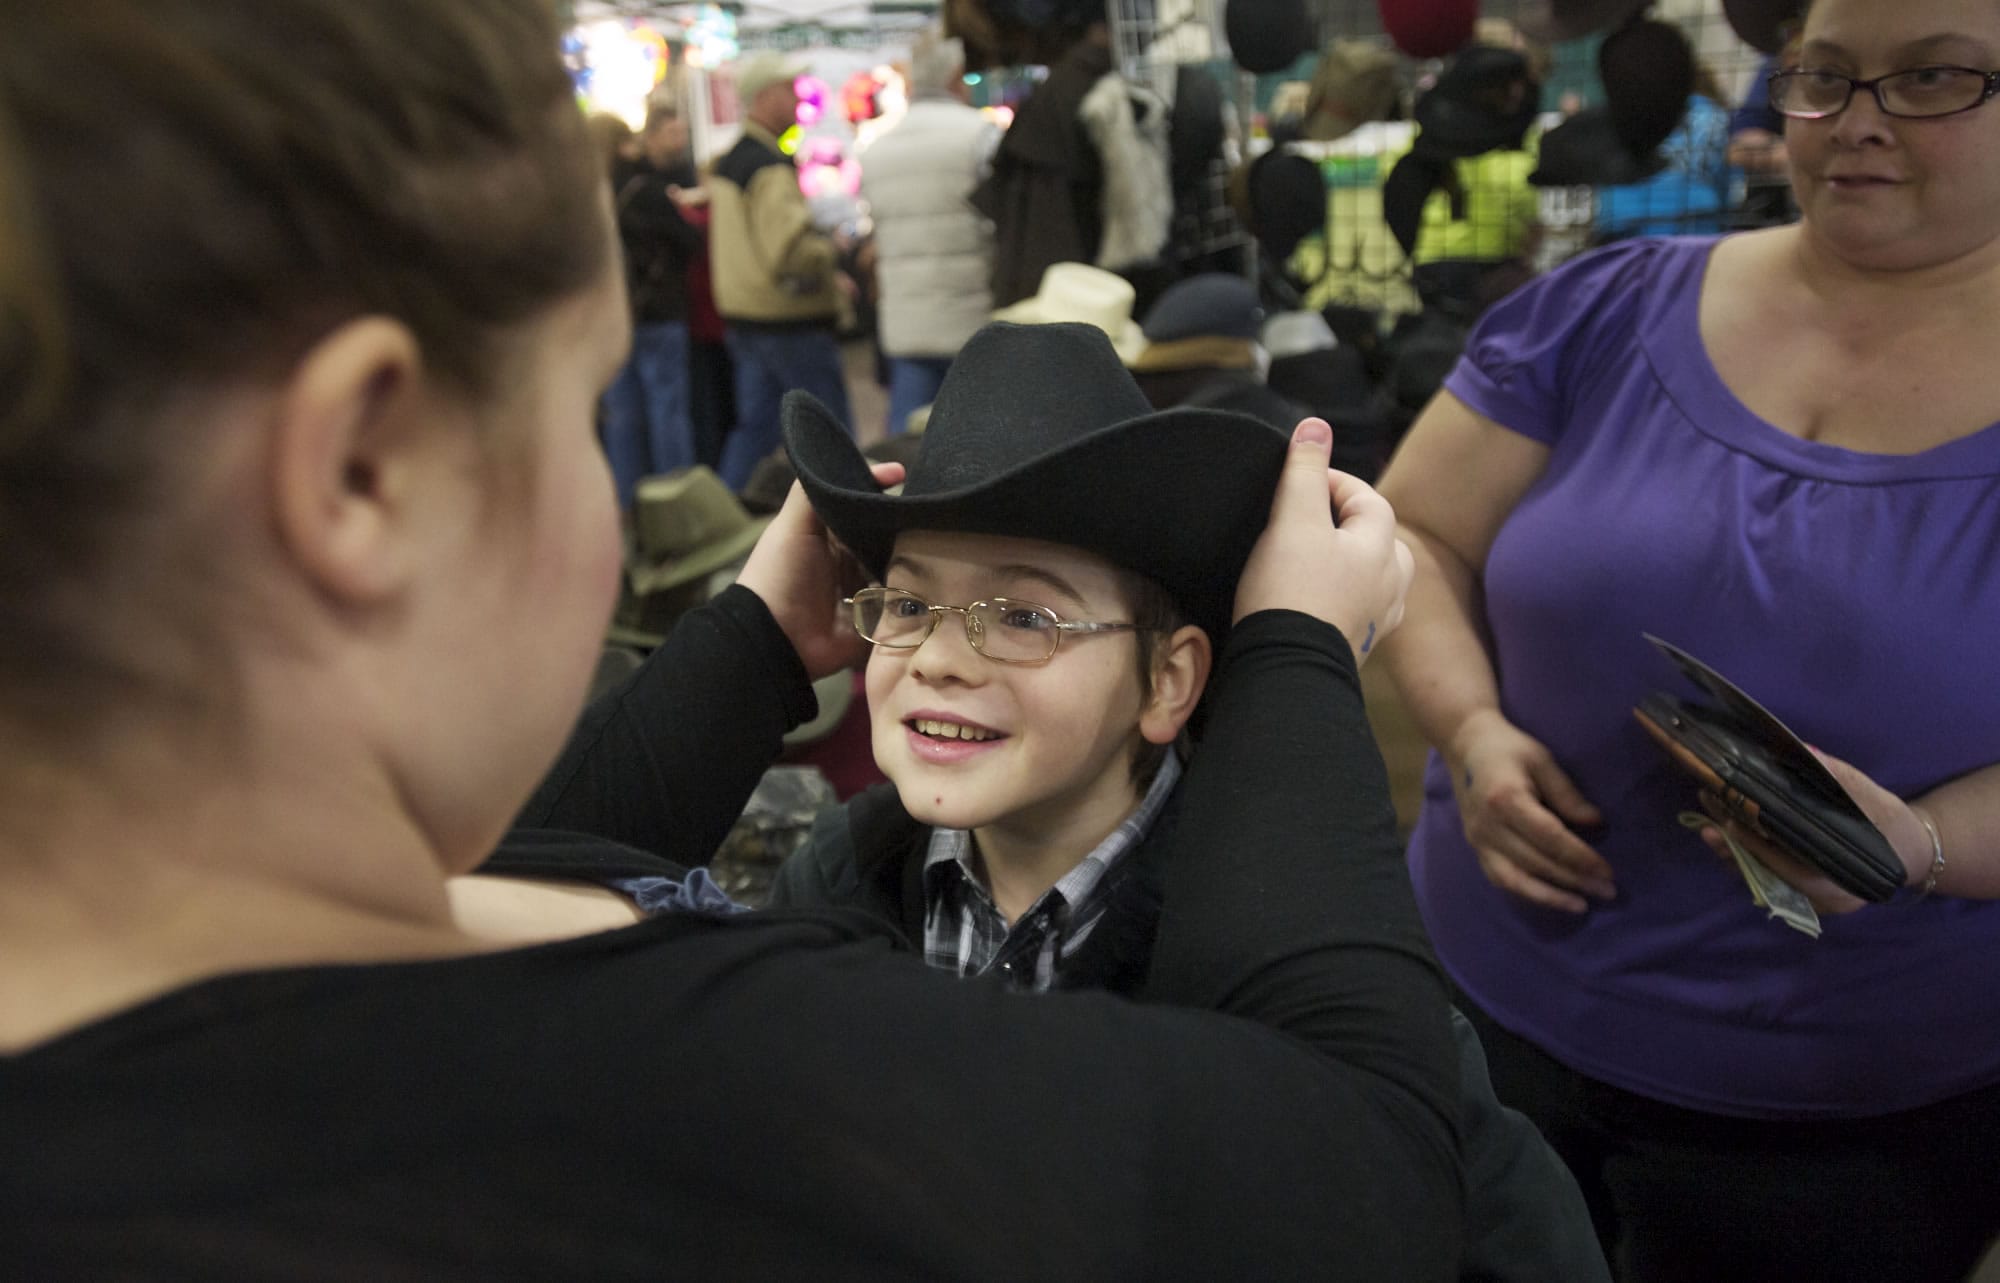 Austin Wiley, 10, picks out a new hat with help from his sister Mariah Wiley, left, and mom Kathy Romero at the Washington State Horse Expo on Sunday.